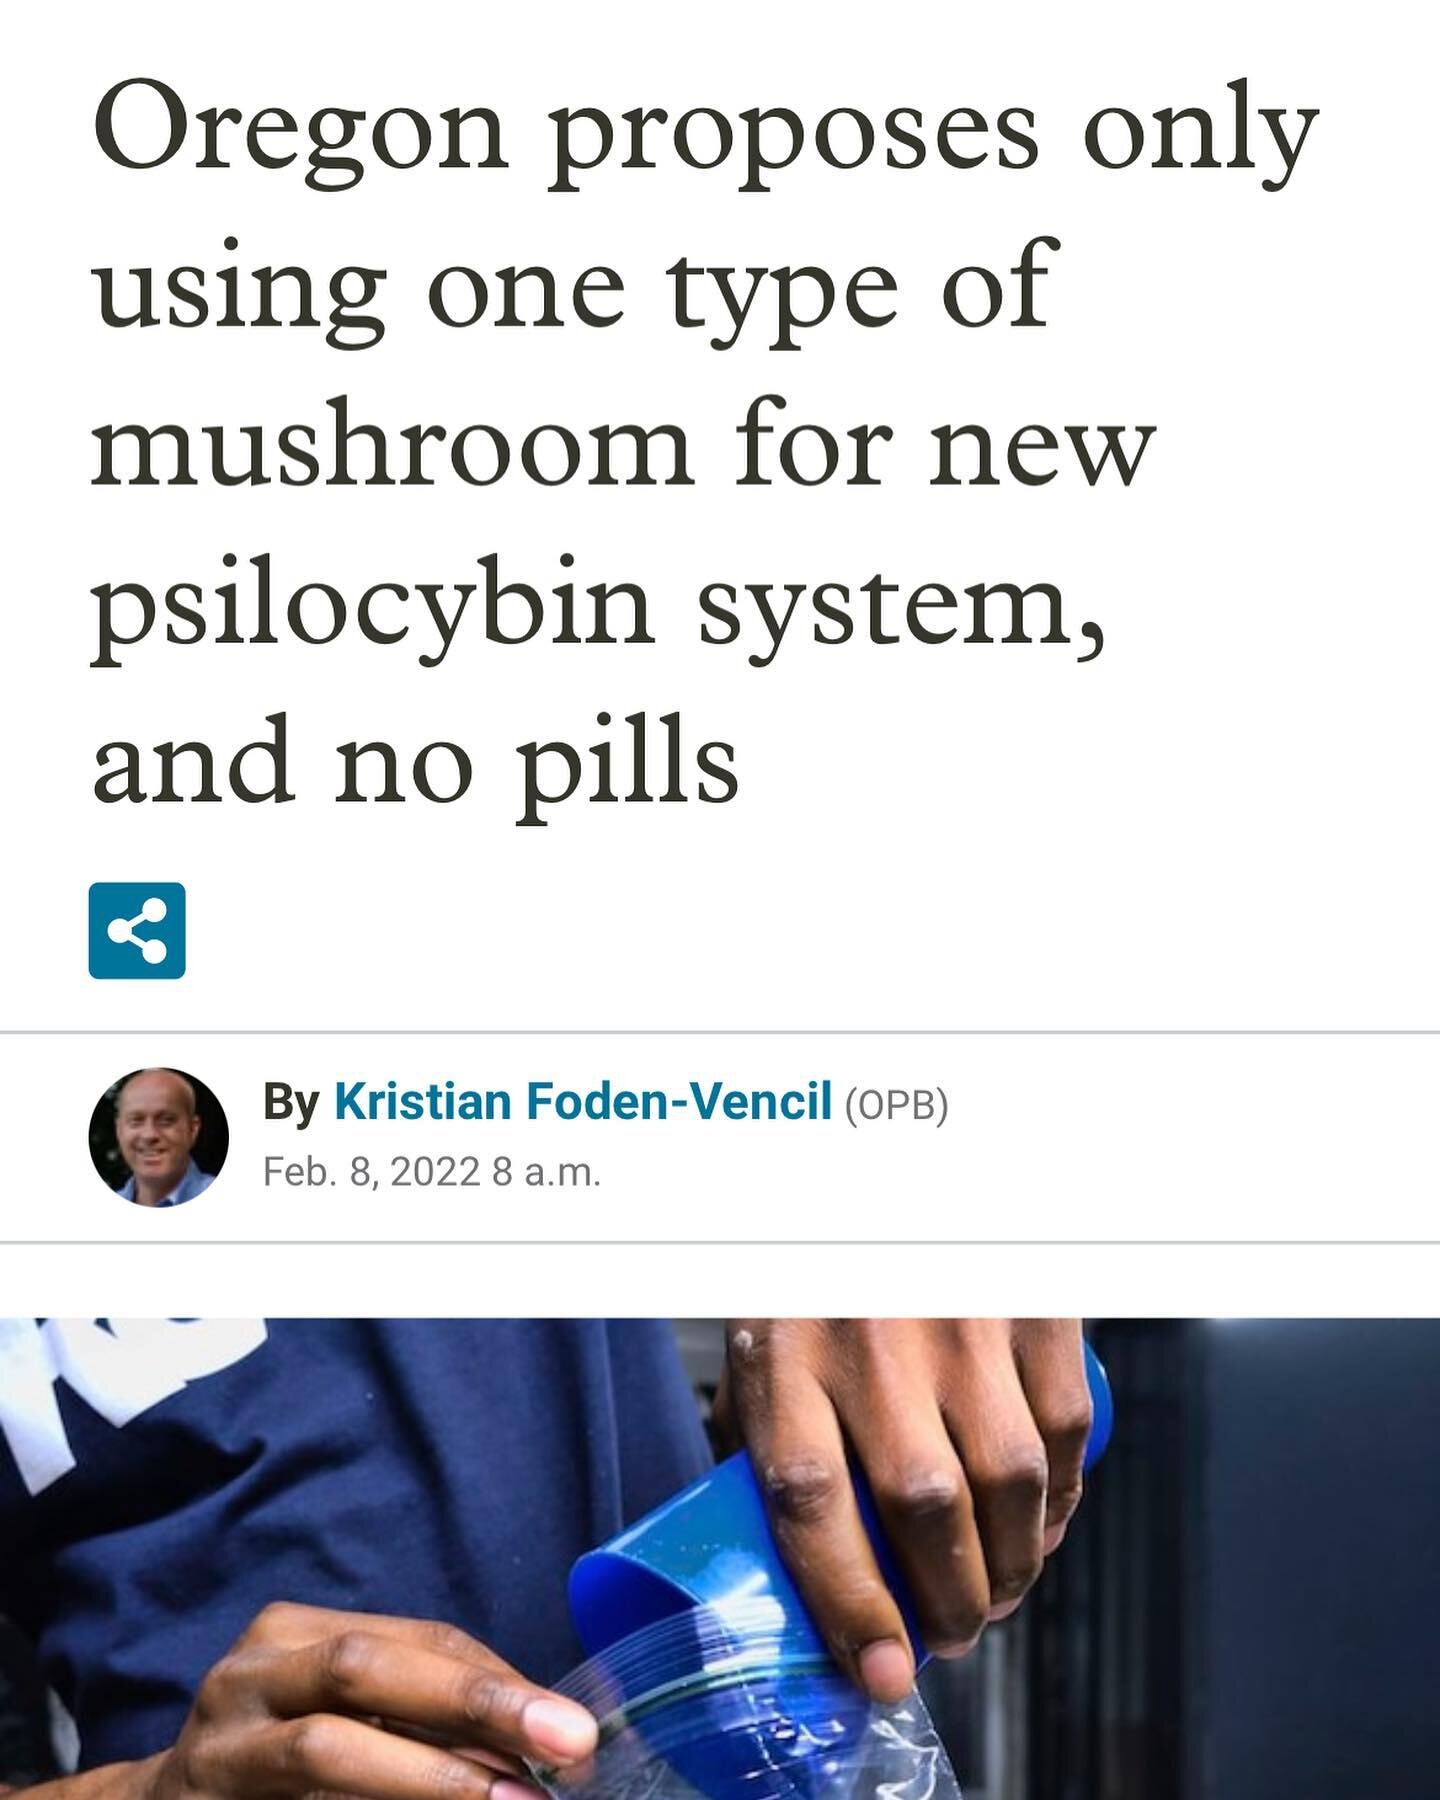 Oregon says, &ldquo;NO SYNTHETIC PSILOCYBIN!!! 

This is a great precedent to set that organic fungi is better than synthetic.

&ldquo;Oregon would only allow the use of one mushroom species in its new psilocybin system and would ban chemically synth